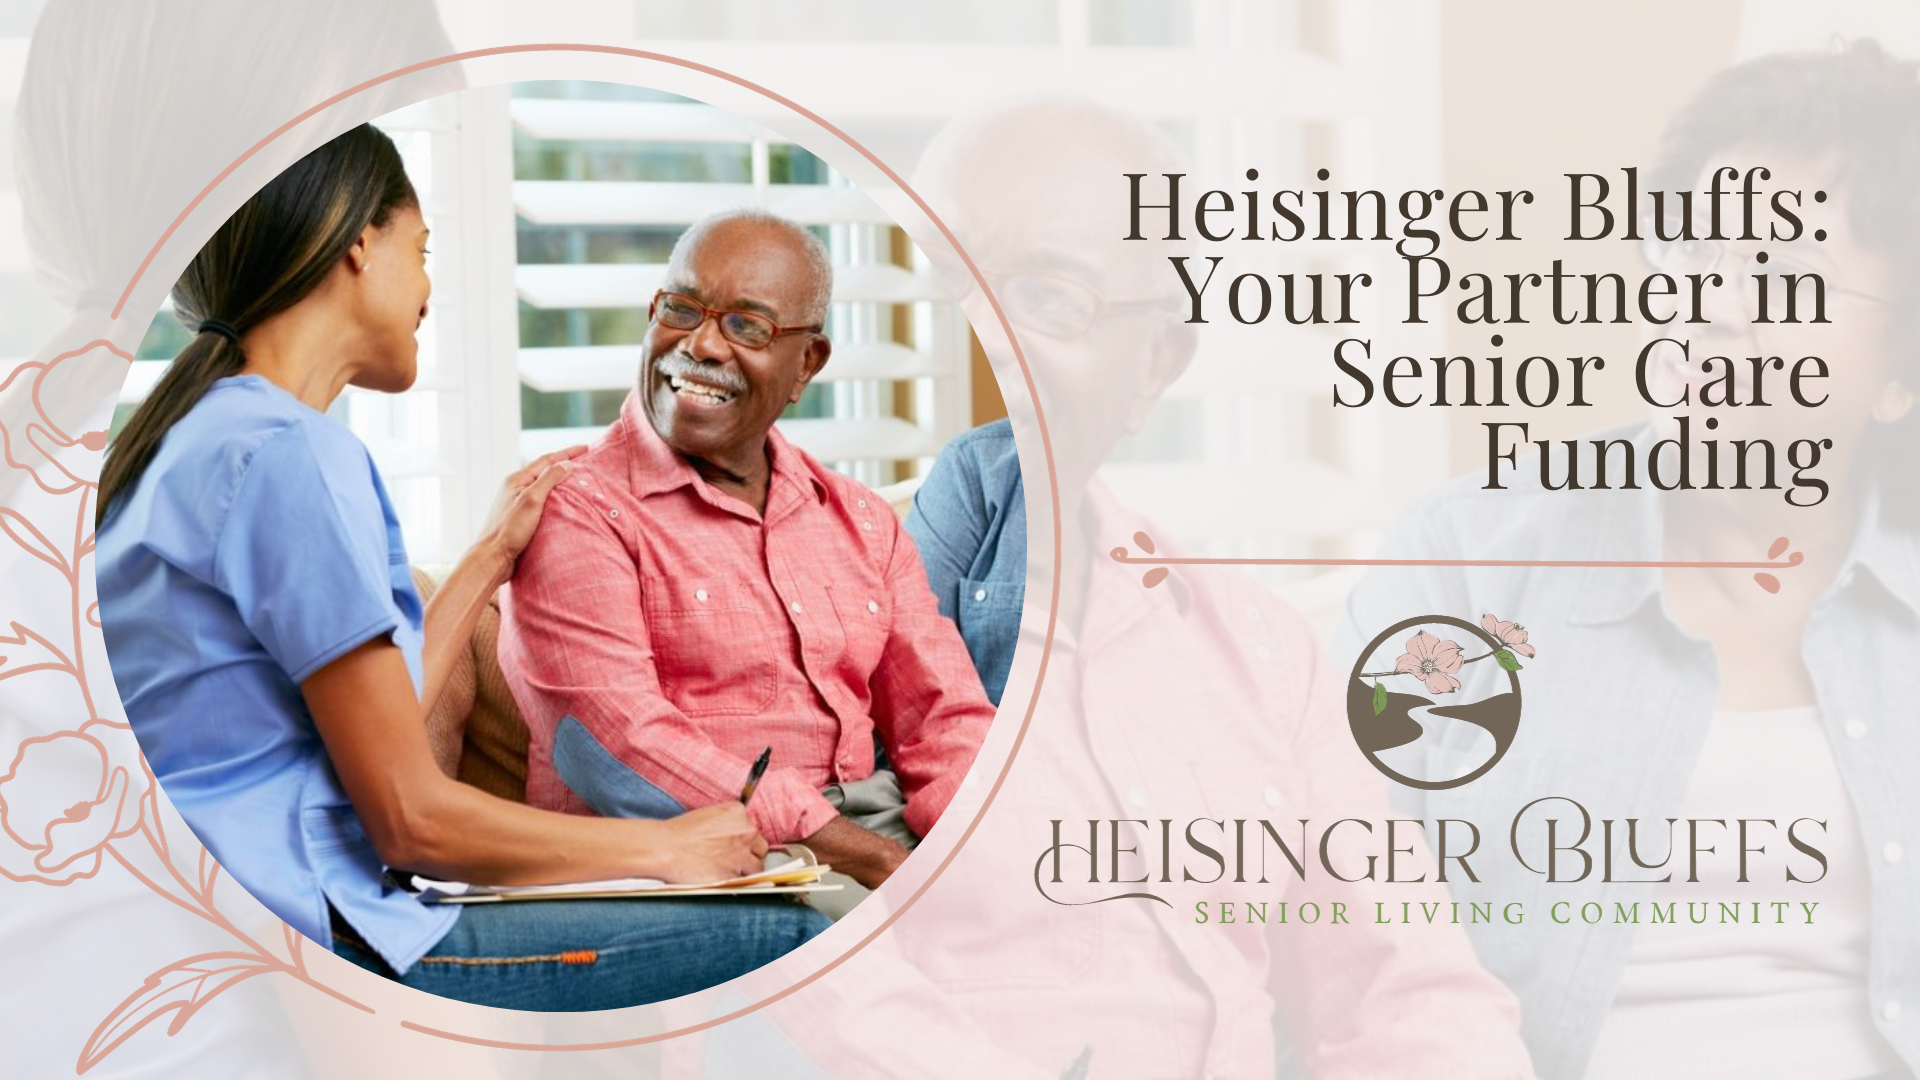 Heisinger Bluffs in Jefferson City, Missouri are dedicated to providing clarity, support, and guidance in Senior Care funding